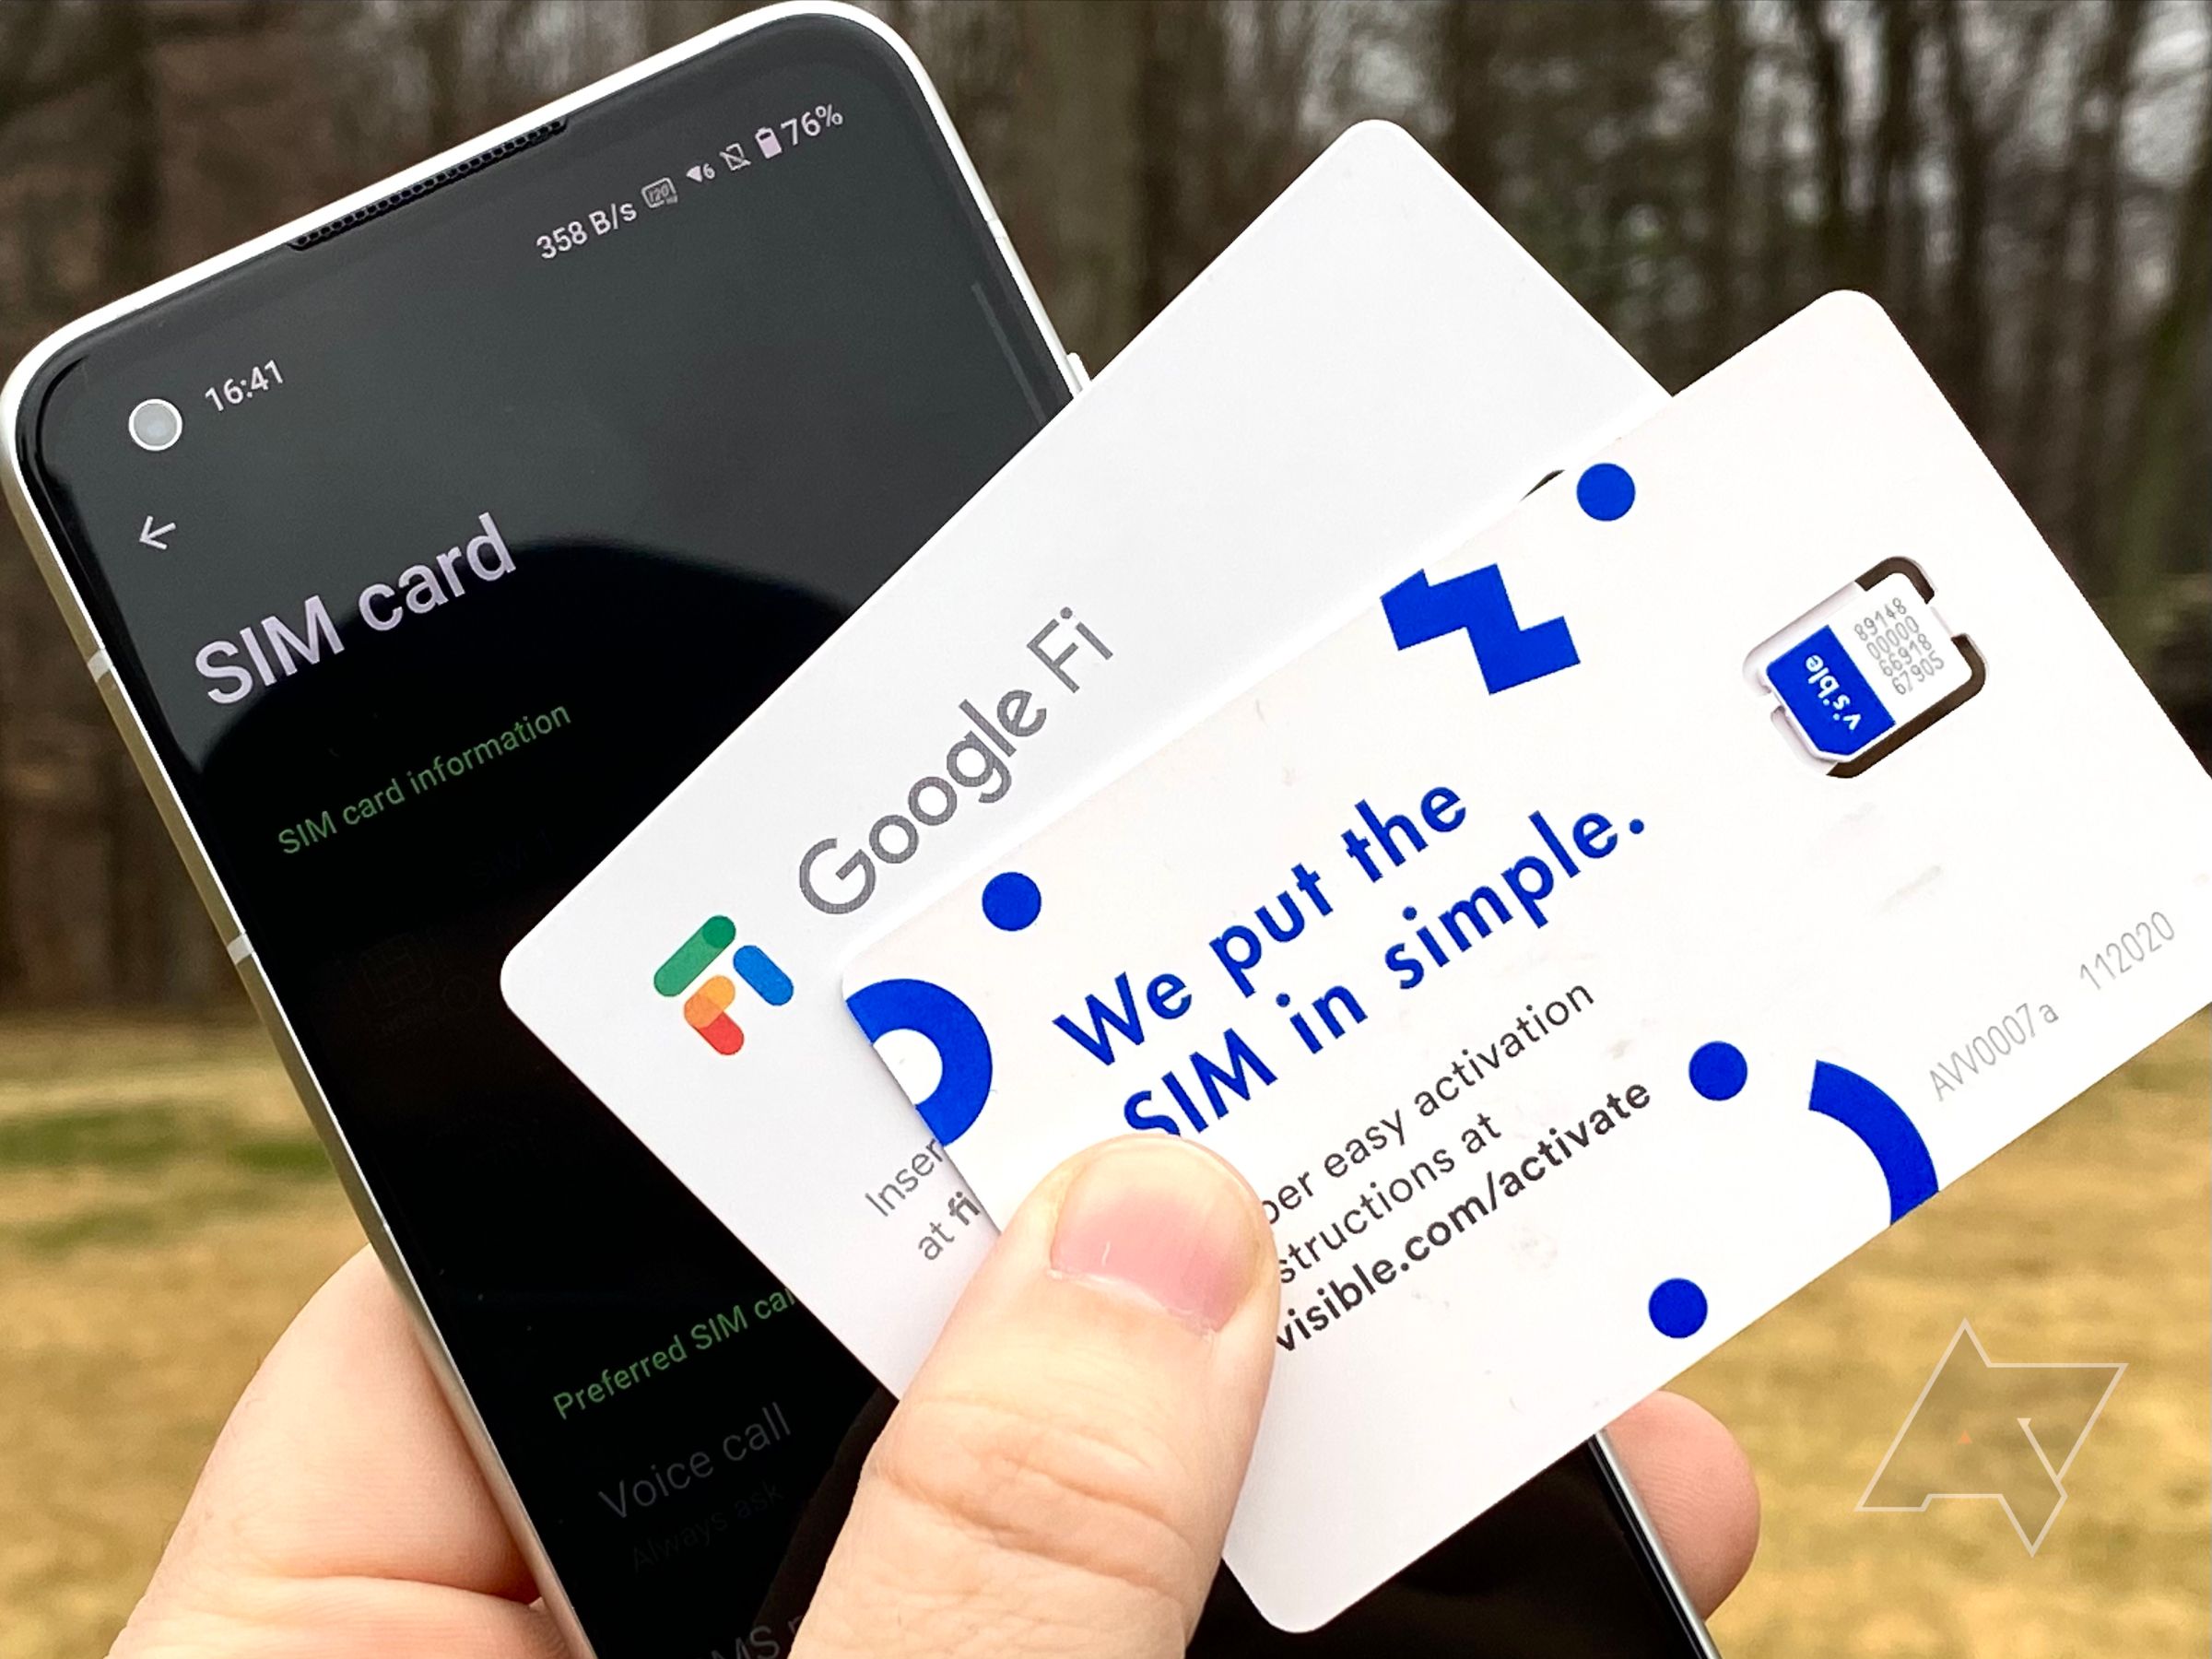 Google Fi vs. Traditional Carriers: Which Offers the Best Value? - Data speeds and connectivity on Google Fi